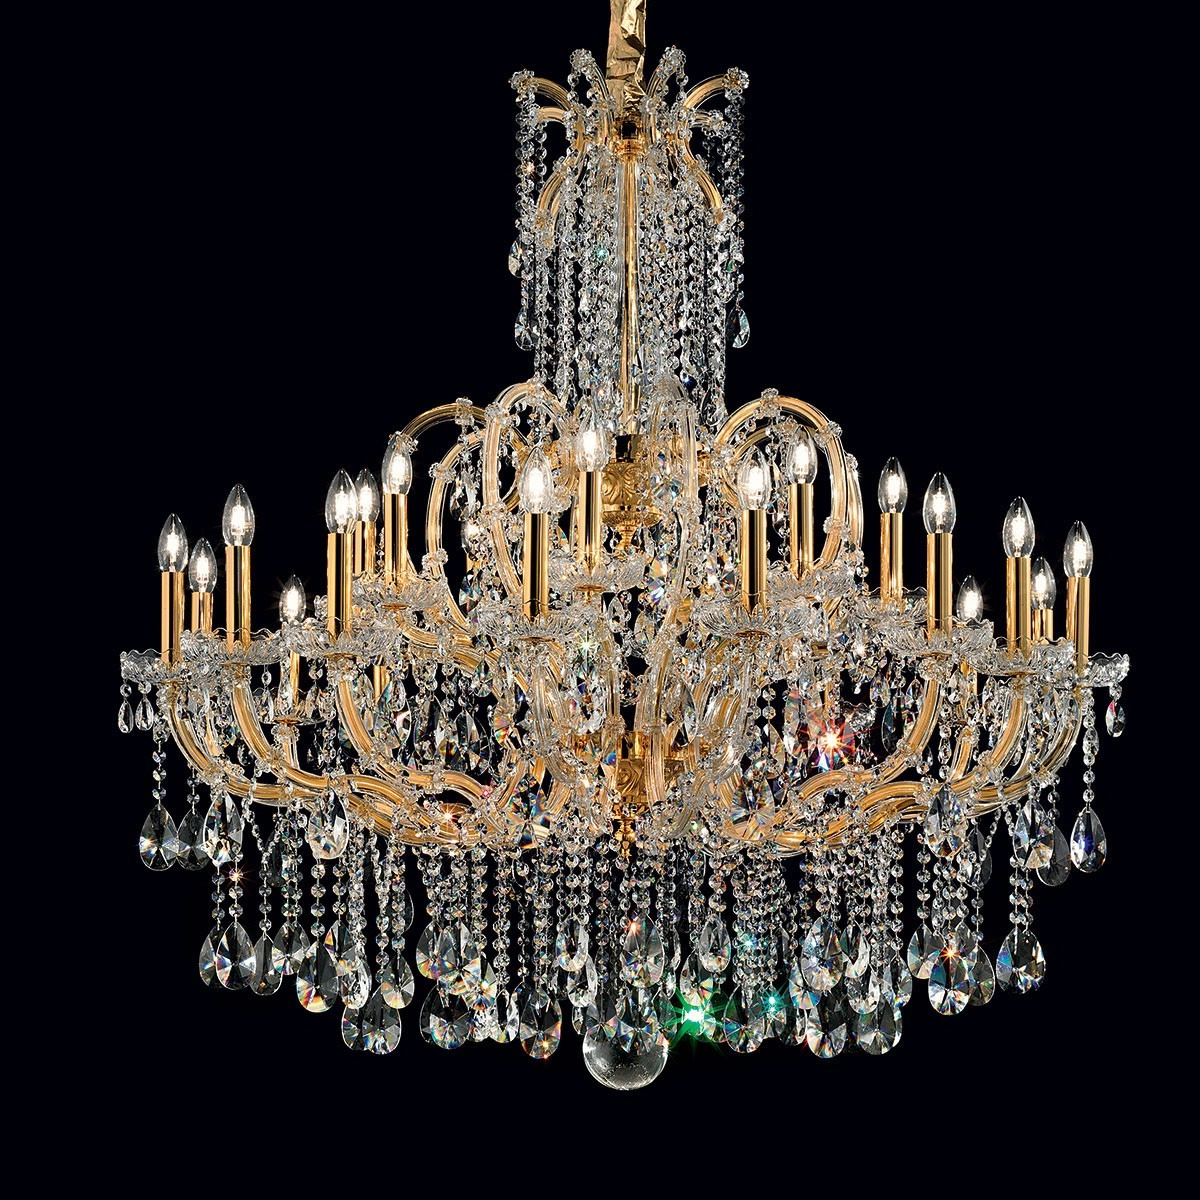 24 lights gold maria theresa chandelier